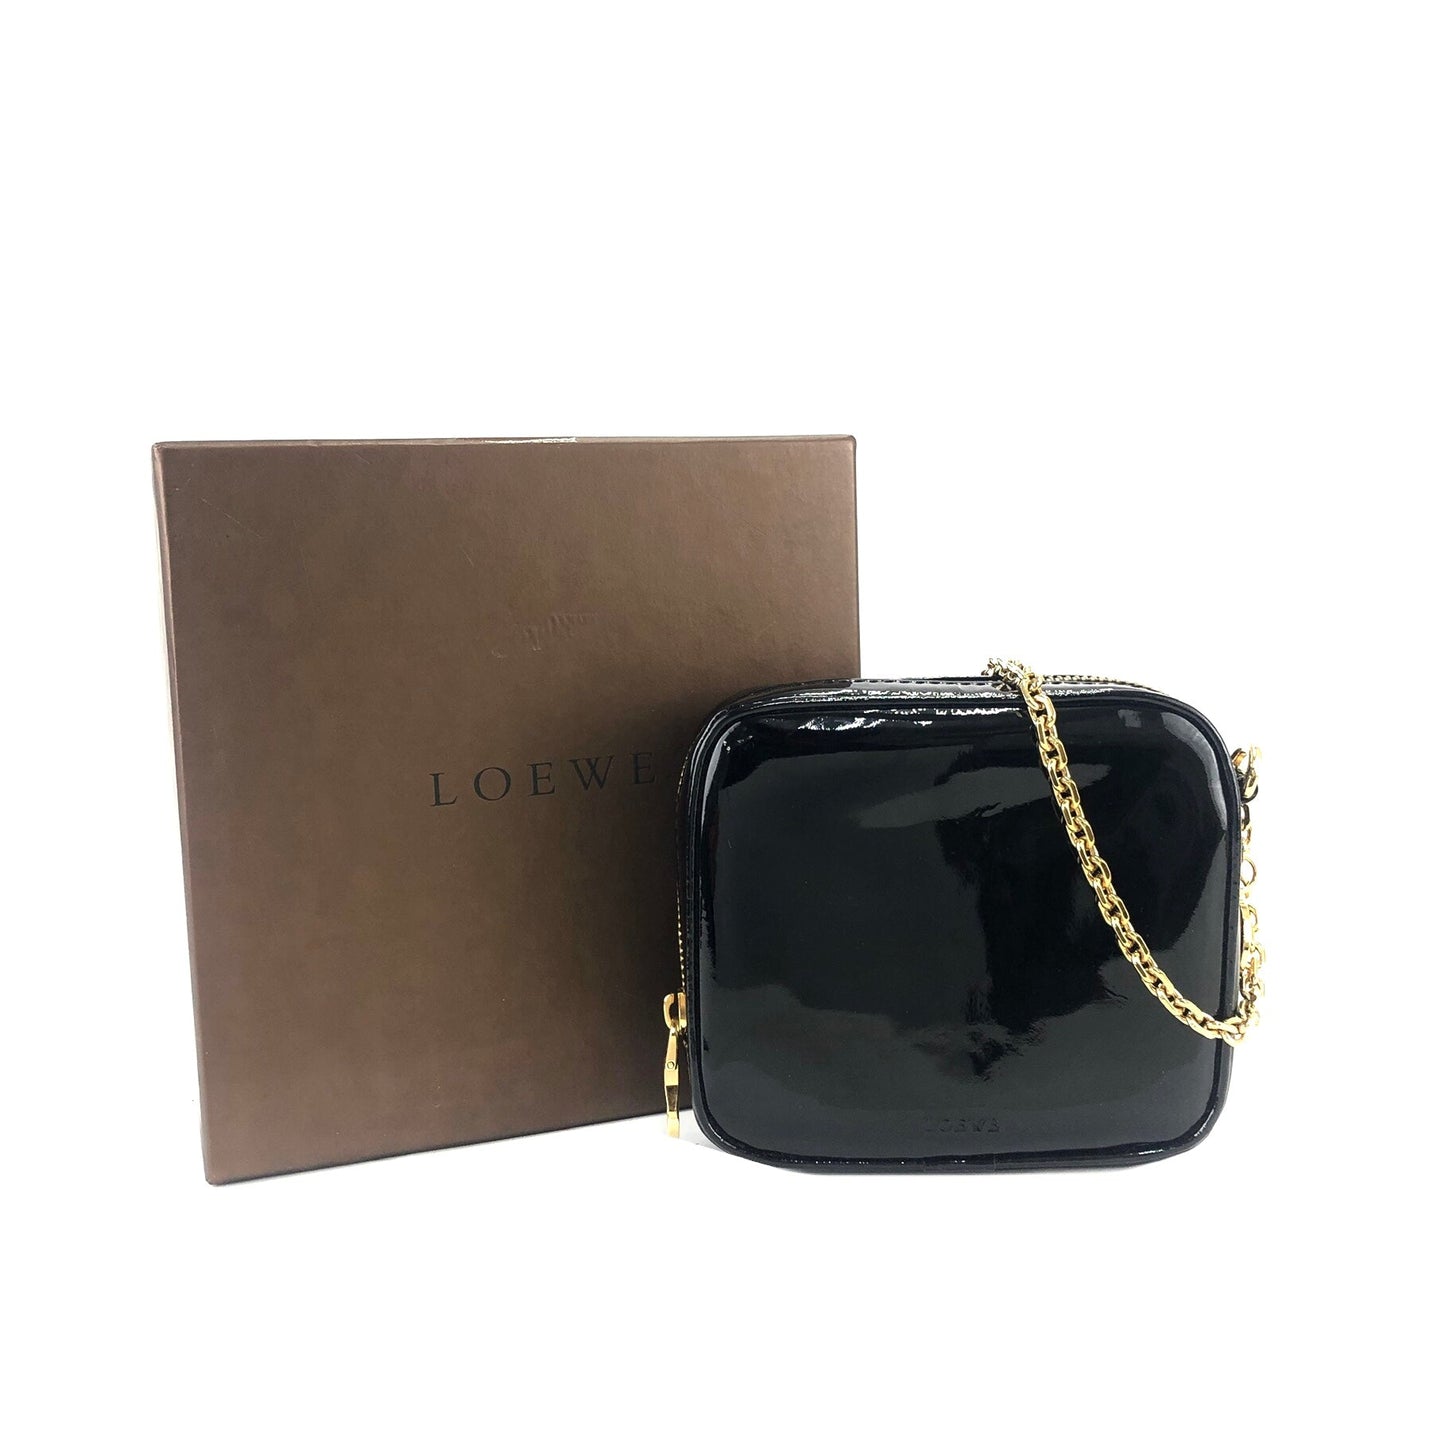 LOEWE Patent leather Chain Mini bag Pouch Black Vintage Old cg2mth